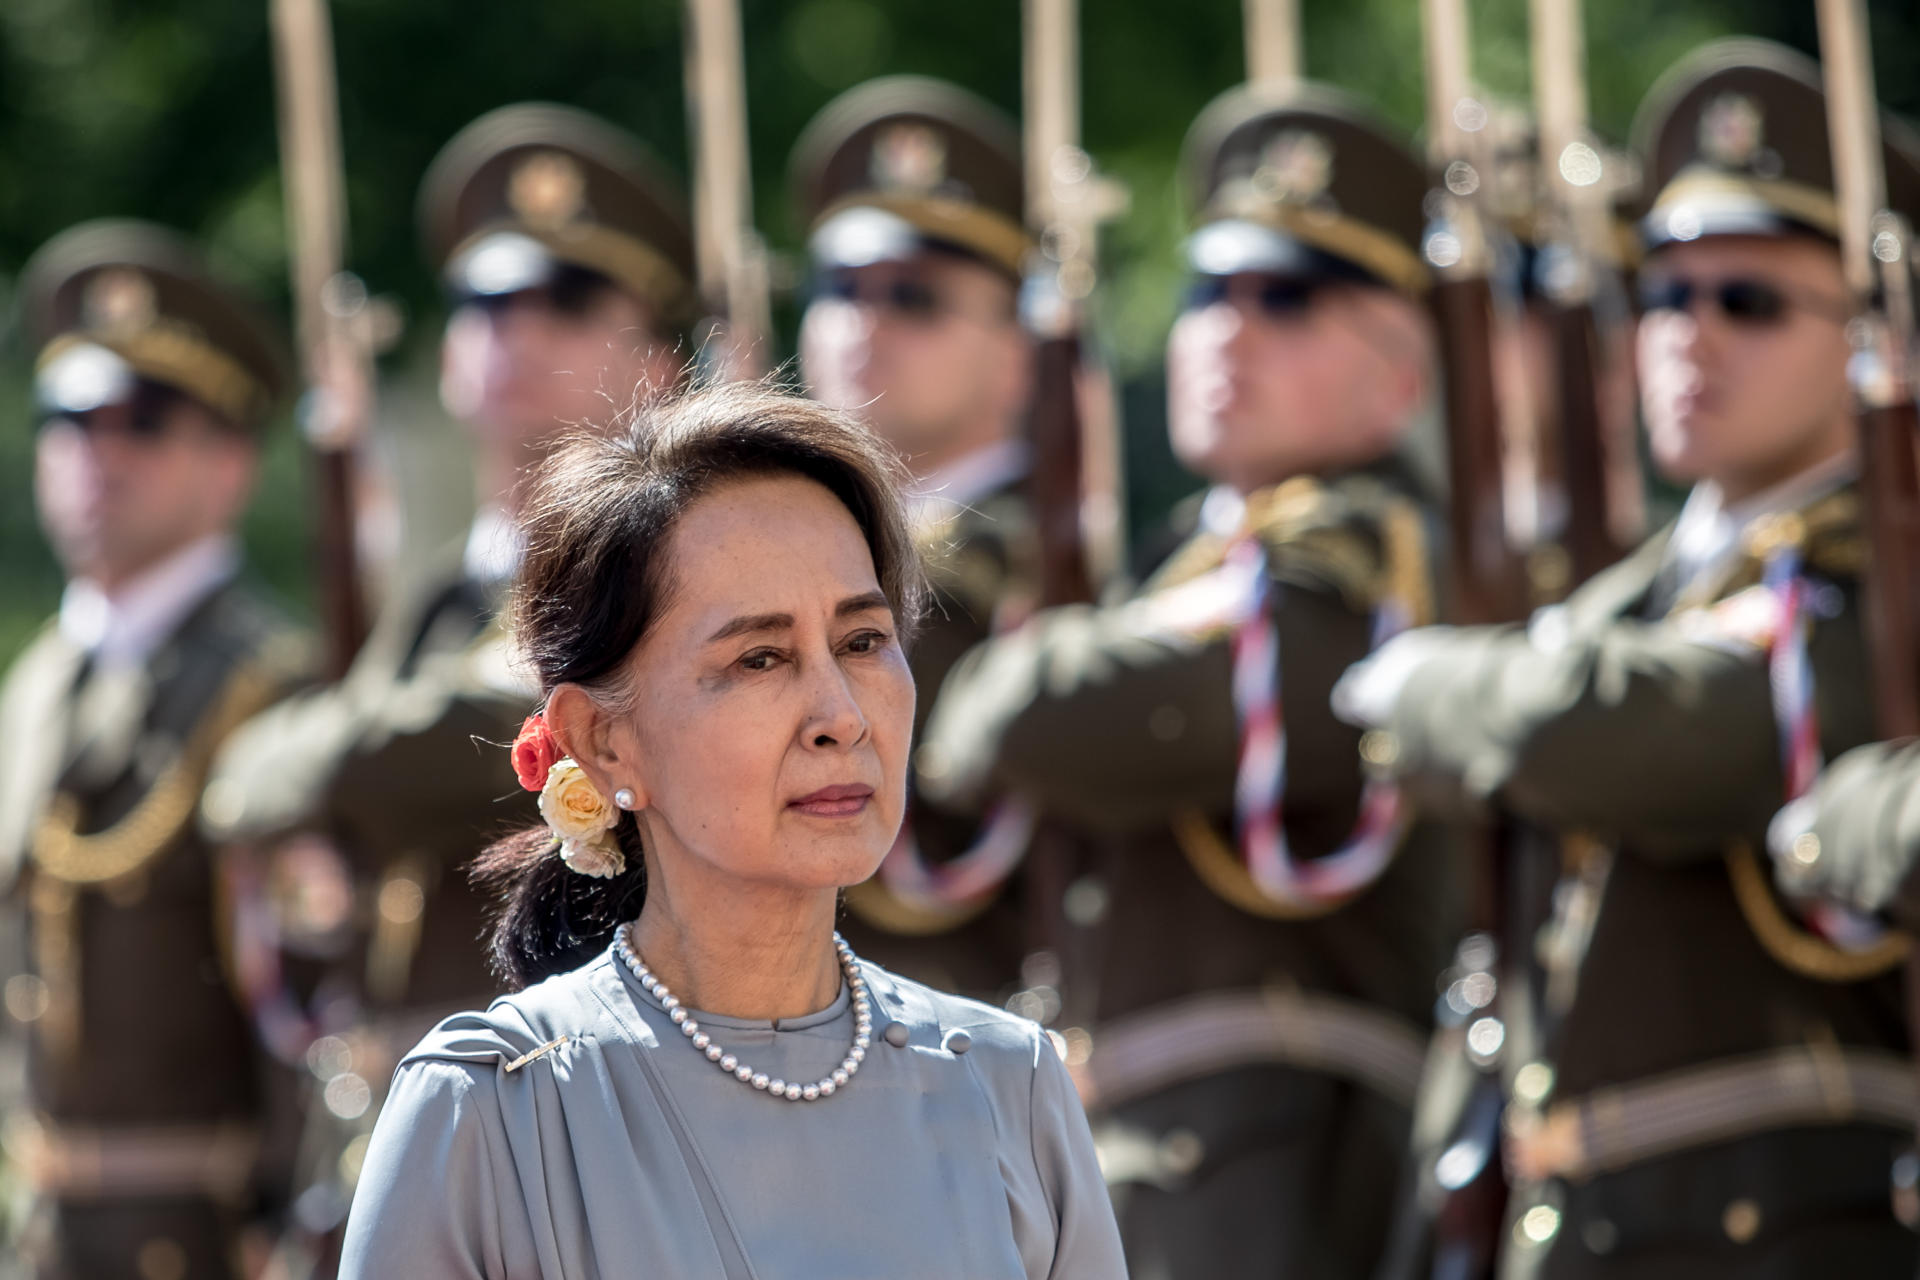 Myanmar's State Counselor Aung San Suu Kyi inspects a guard of honor during a welcome ceremony in Prague, Czech Republic, 03 June 2019 (reissued 24 May 2021). EPA-EFE FILE/MARTIN DIVISEK
